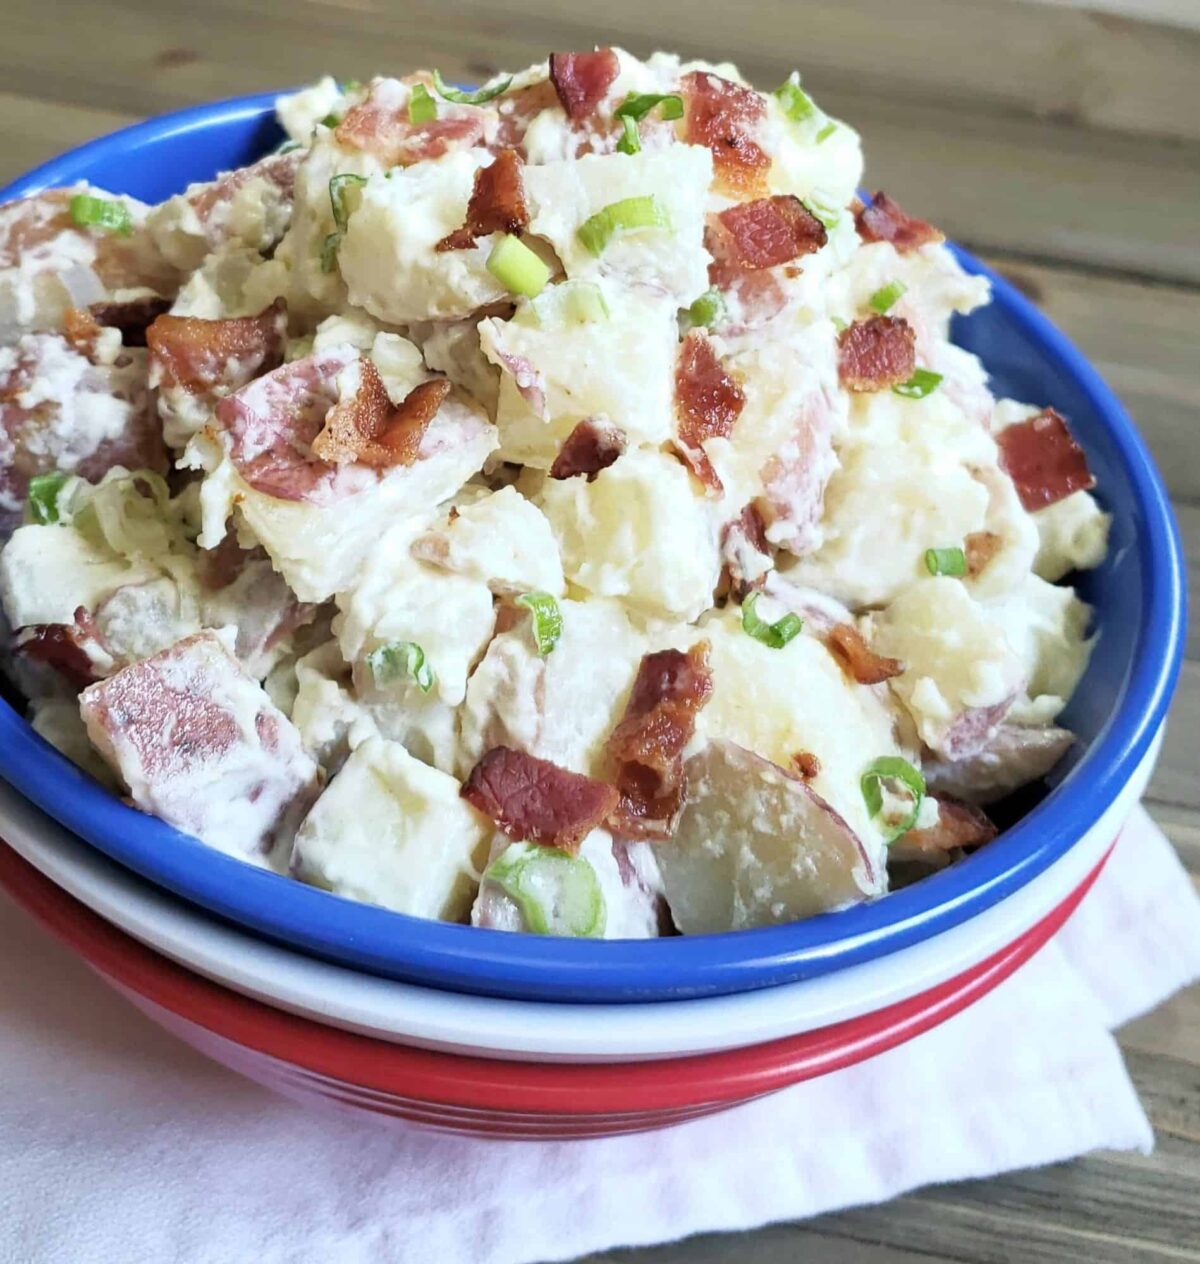 15. Sour Cream and Green Onion Potato Salad with Bacon - Grits and Gouda